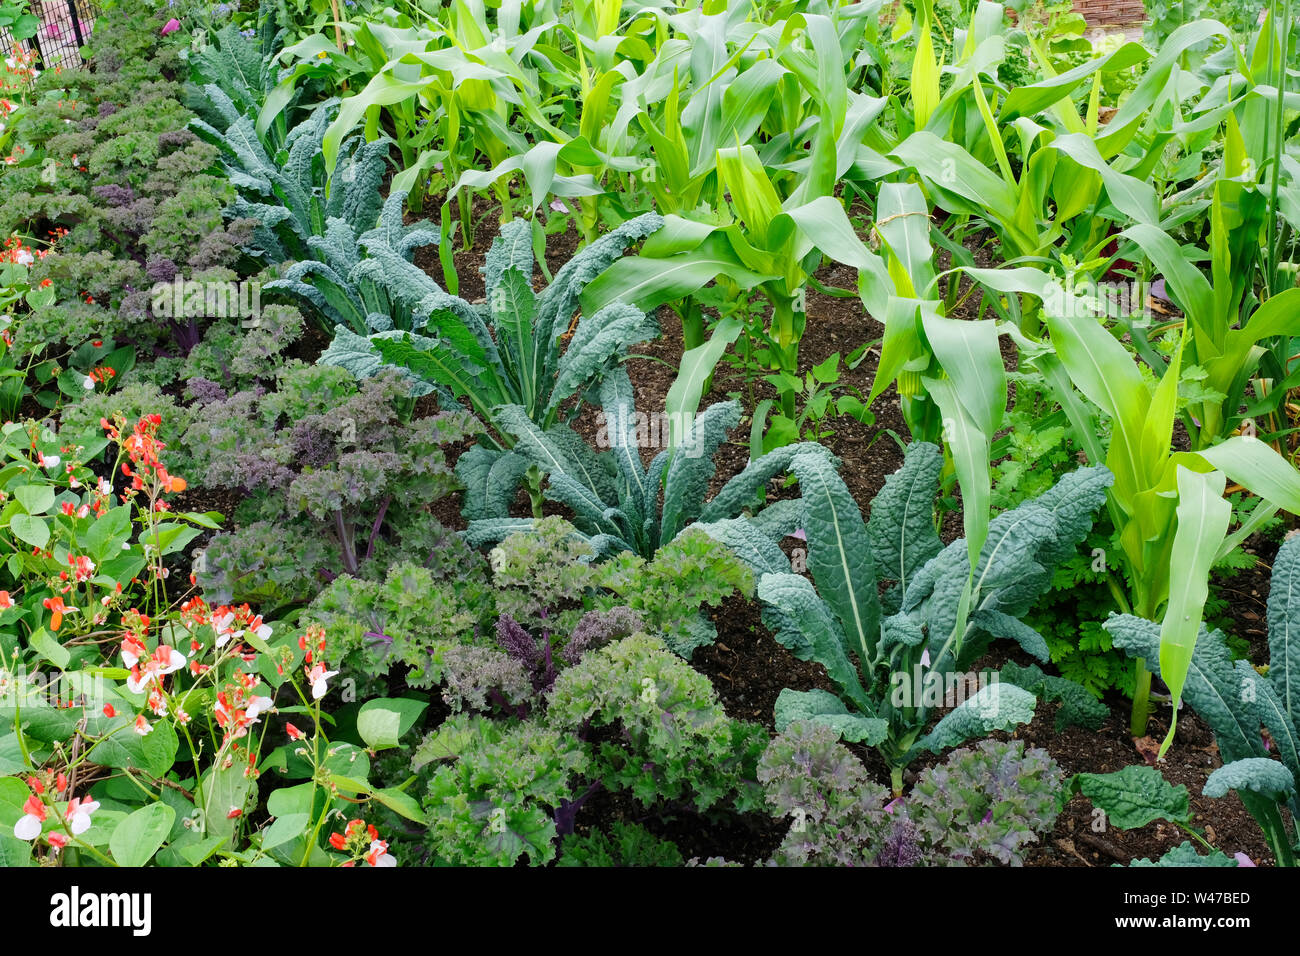 A tightly packed kitchen garden with cavolo nero, kale, french beans and sweet corn - John Gollop Stock Photo